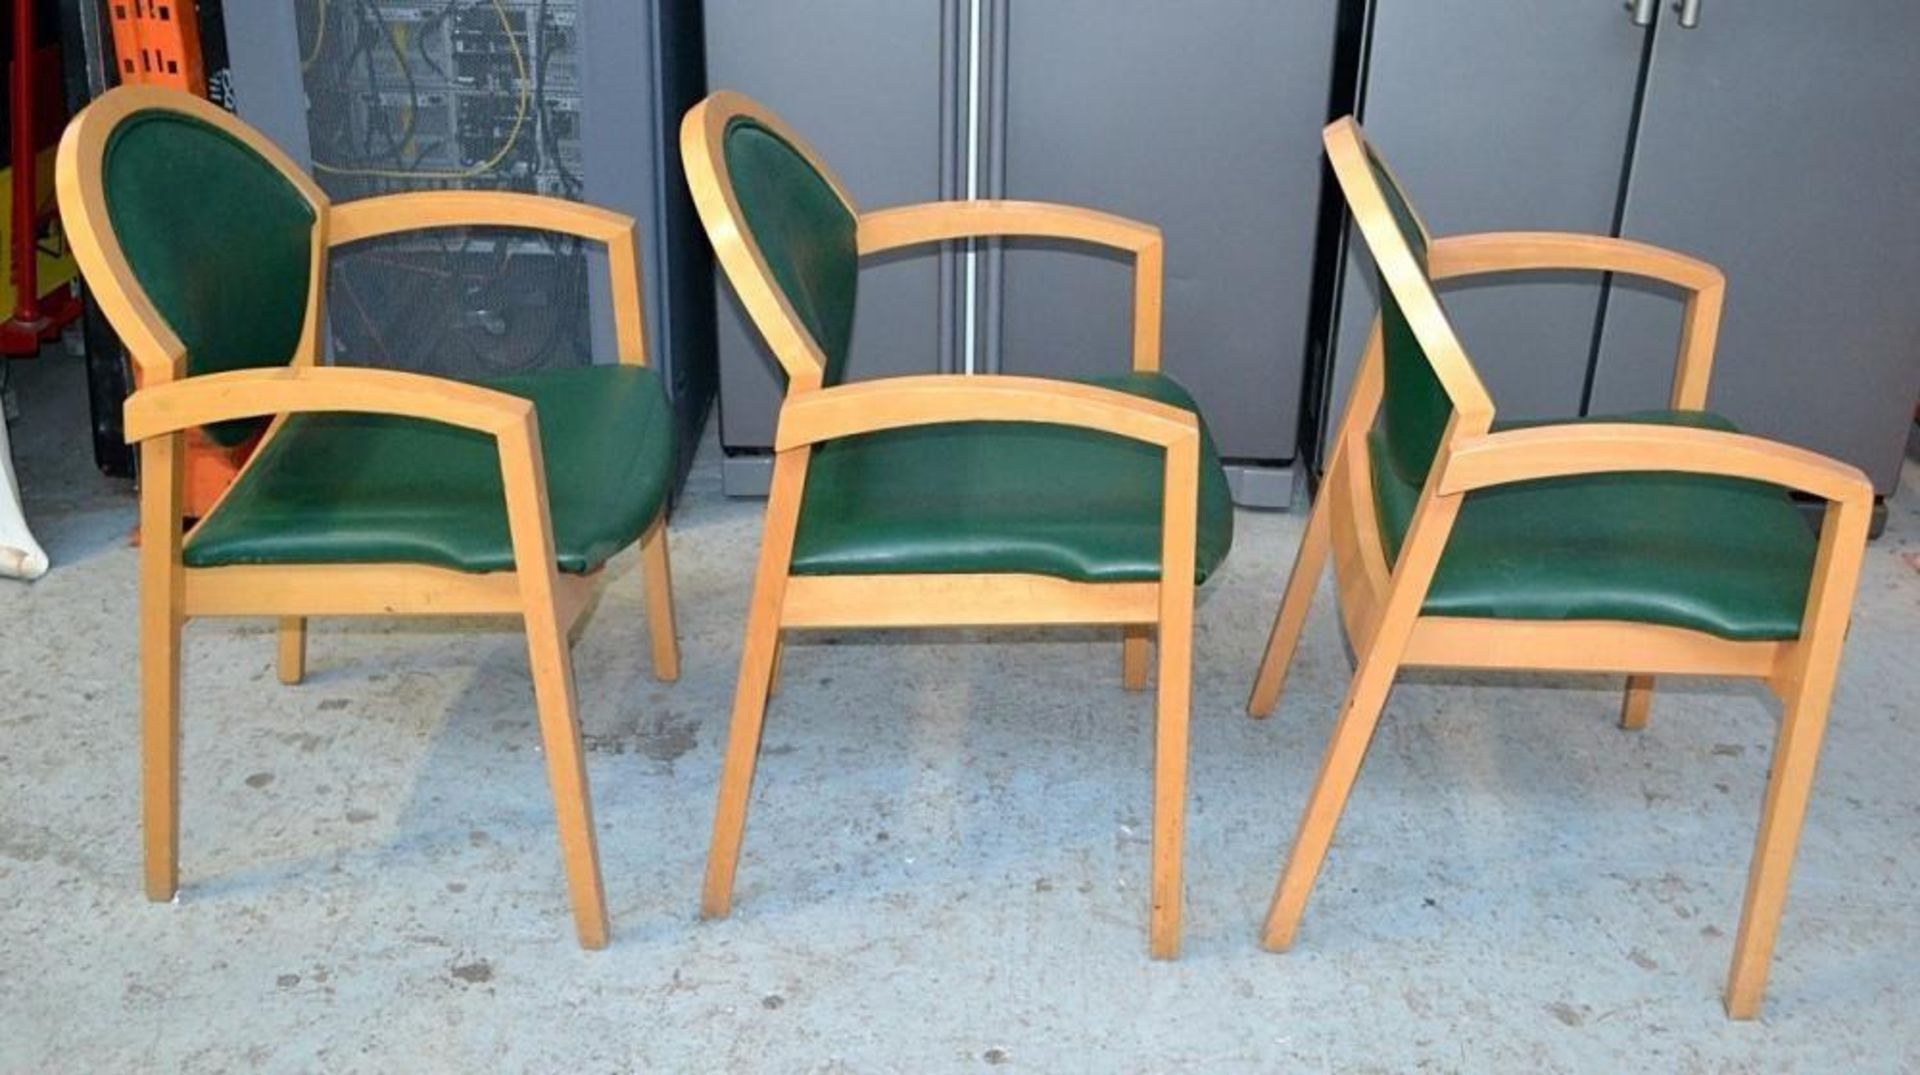 3 x Matching Wooden Chairs Upholstered Green Faux Leather - Dimensions: W57.5 x D50 x H86 x SH46cm - - Image 2 of 8